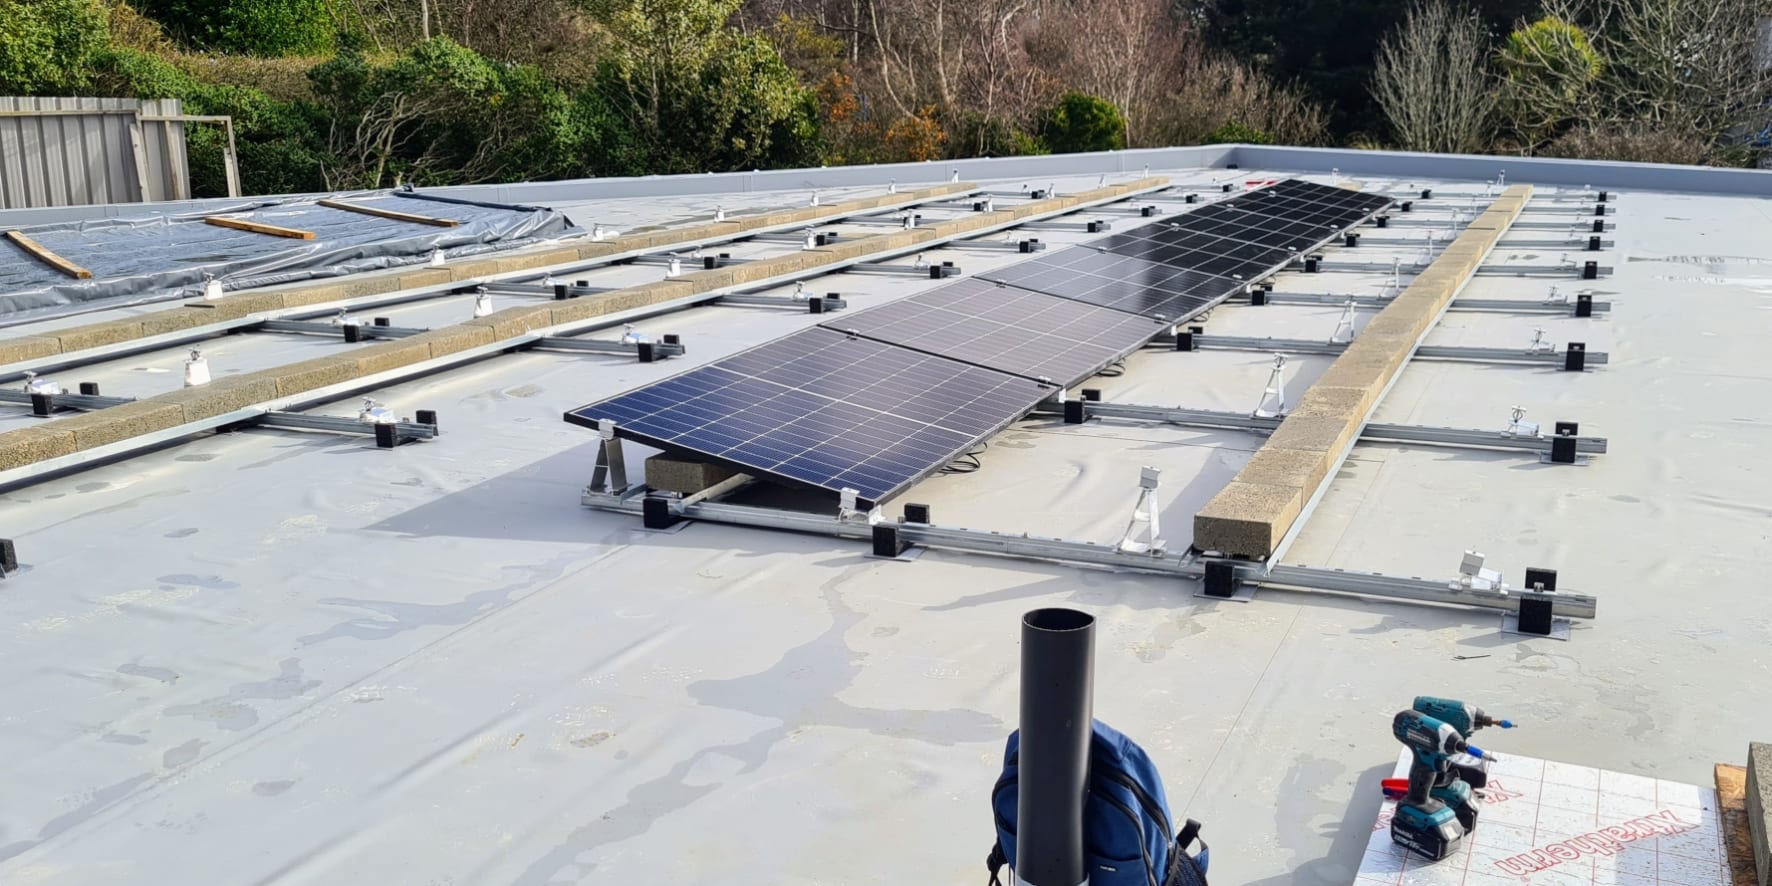 Concrete flat solar roof mounting system,Concrete base roof mounting system